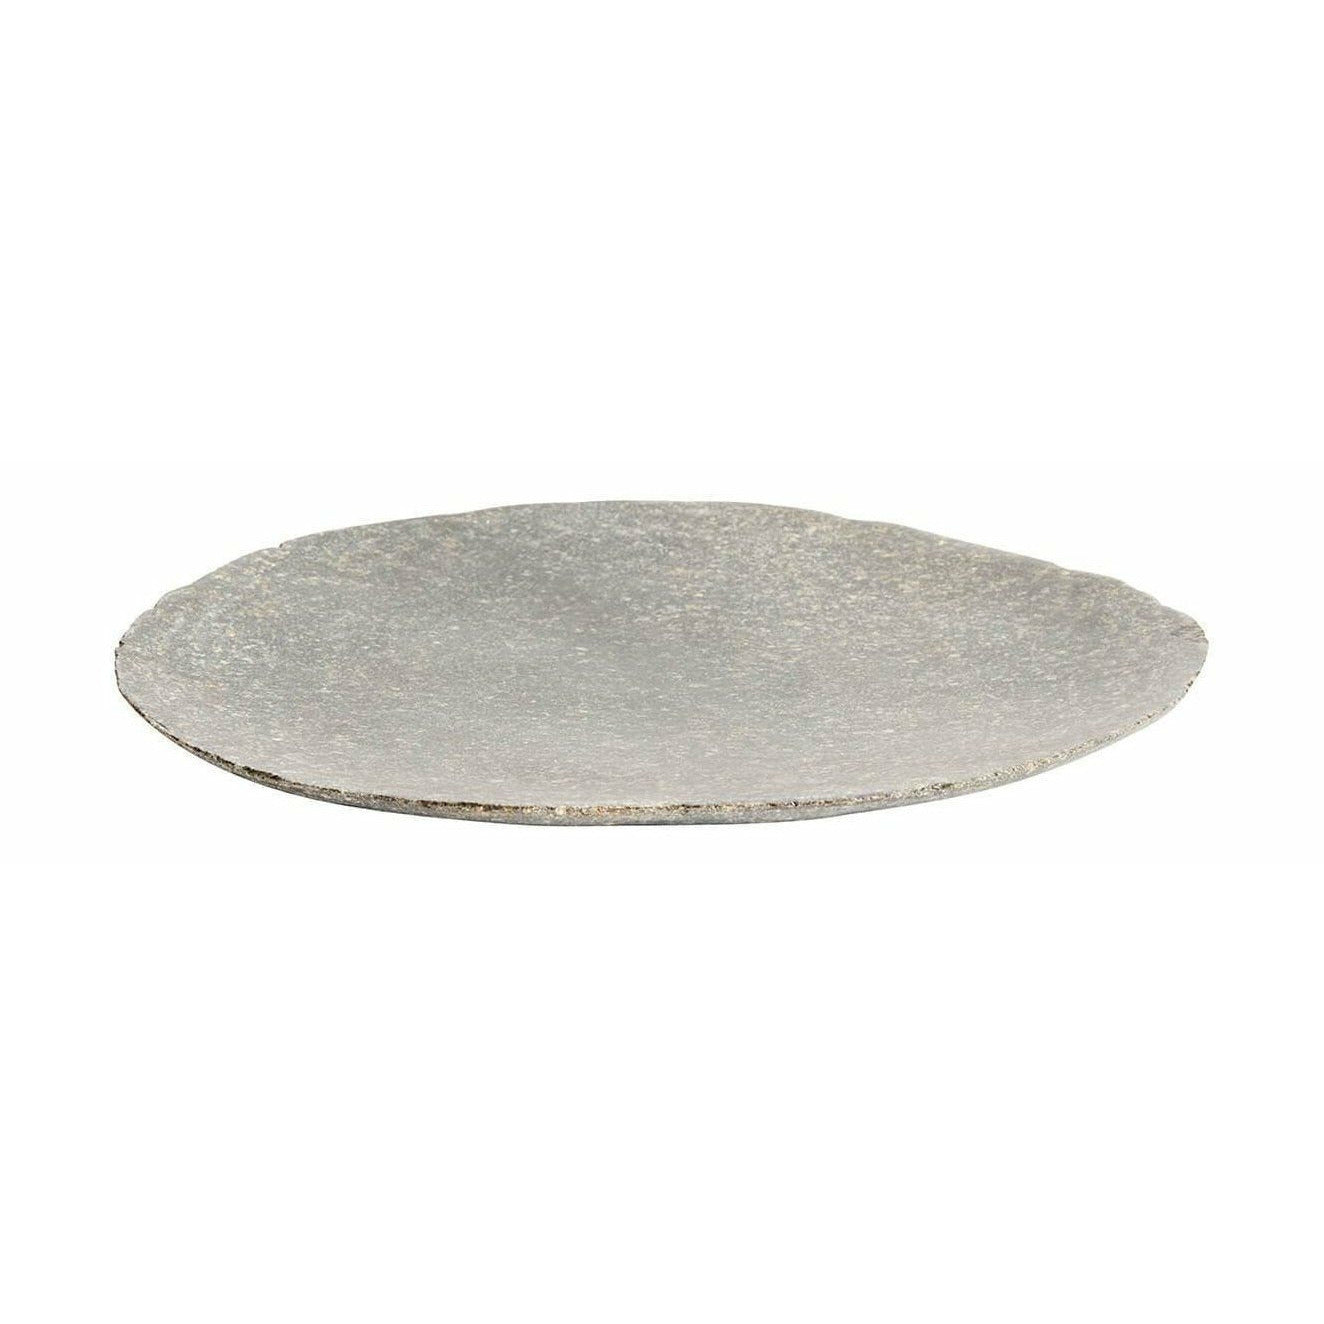 Muubs Valley Plate Riverstone, 28cm